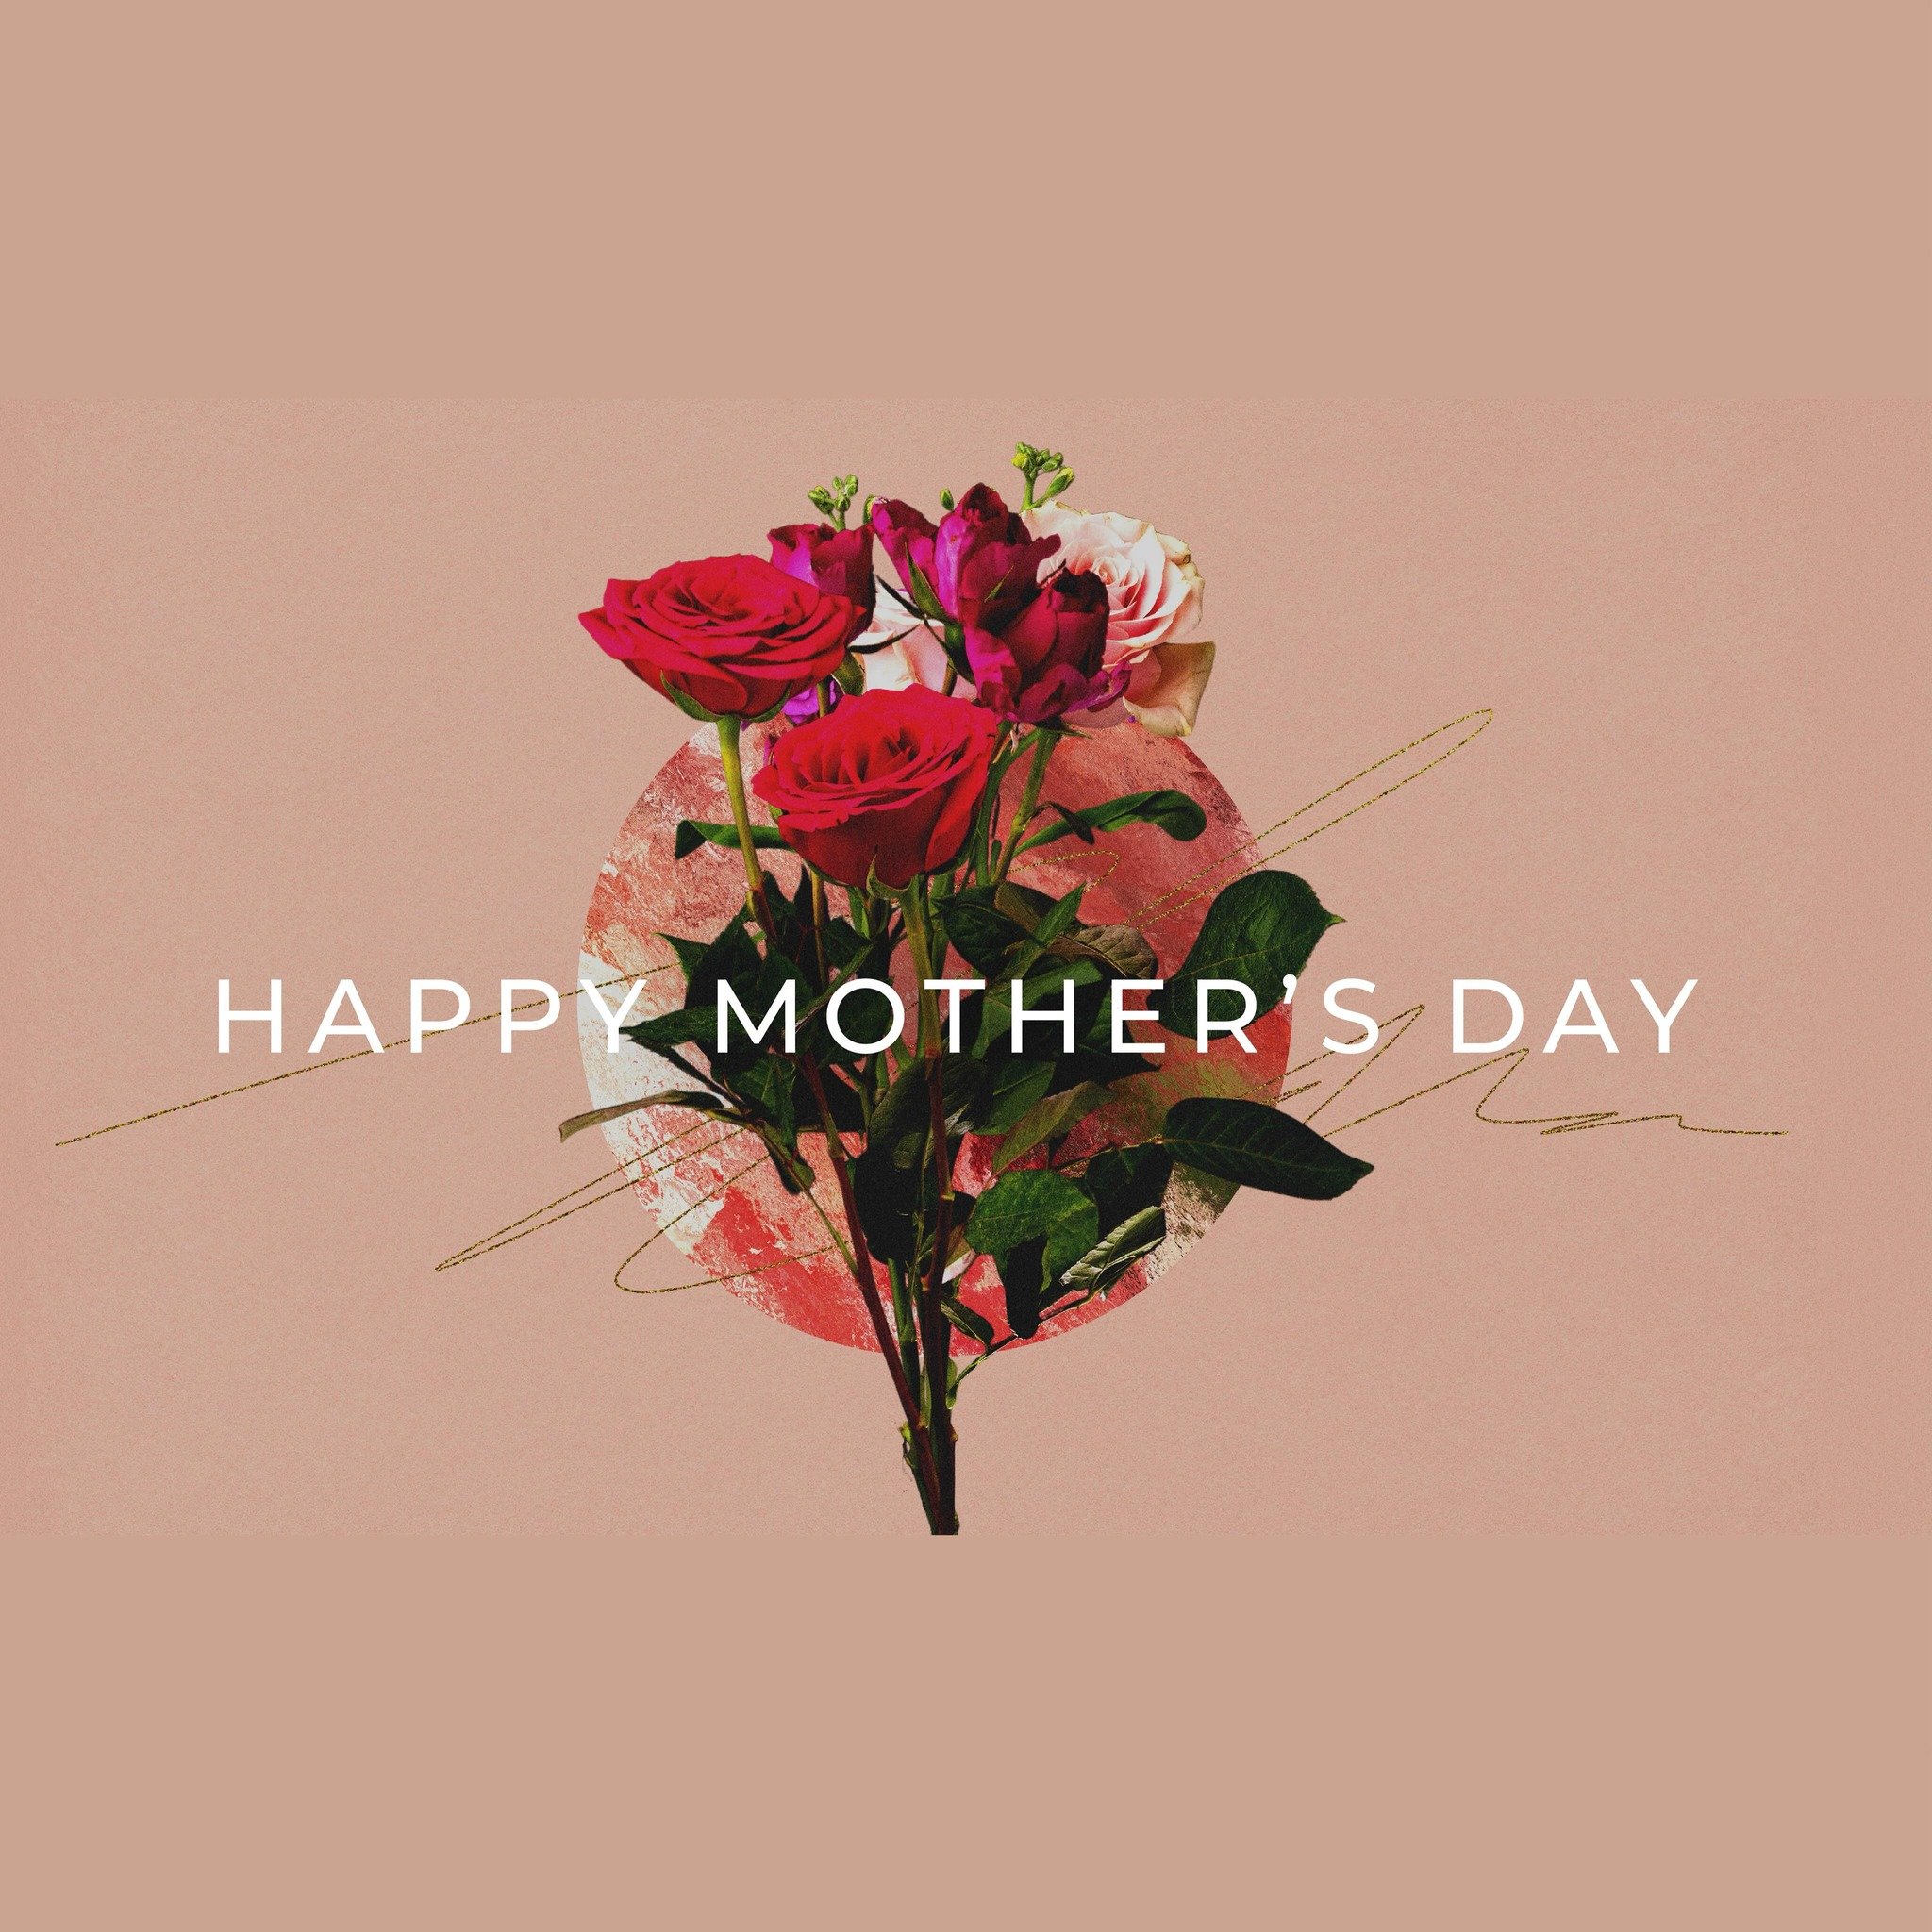 &ldquo;Her children arise and call her blessed; her husband also, and he praises her: &ldquo;Many women do noble things, but you surpass them all.&rdquo; - Proverbs 31:29-31

Happy Mother&rsquo;s Day to all our NSCF moms and grandmas. You truly are a